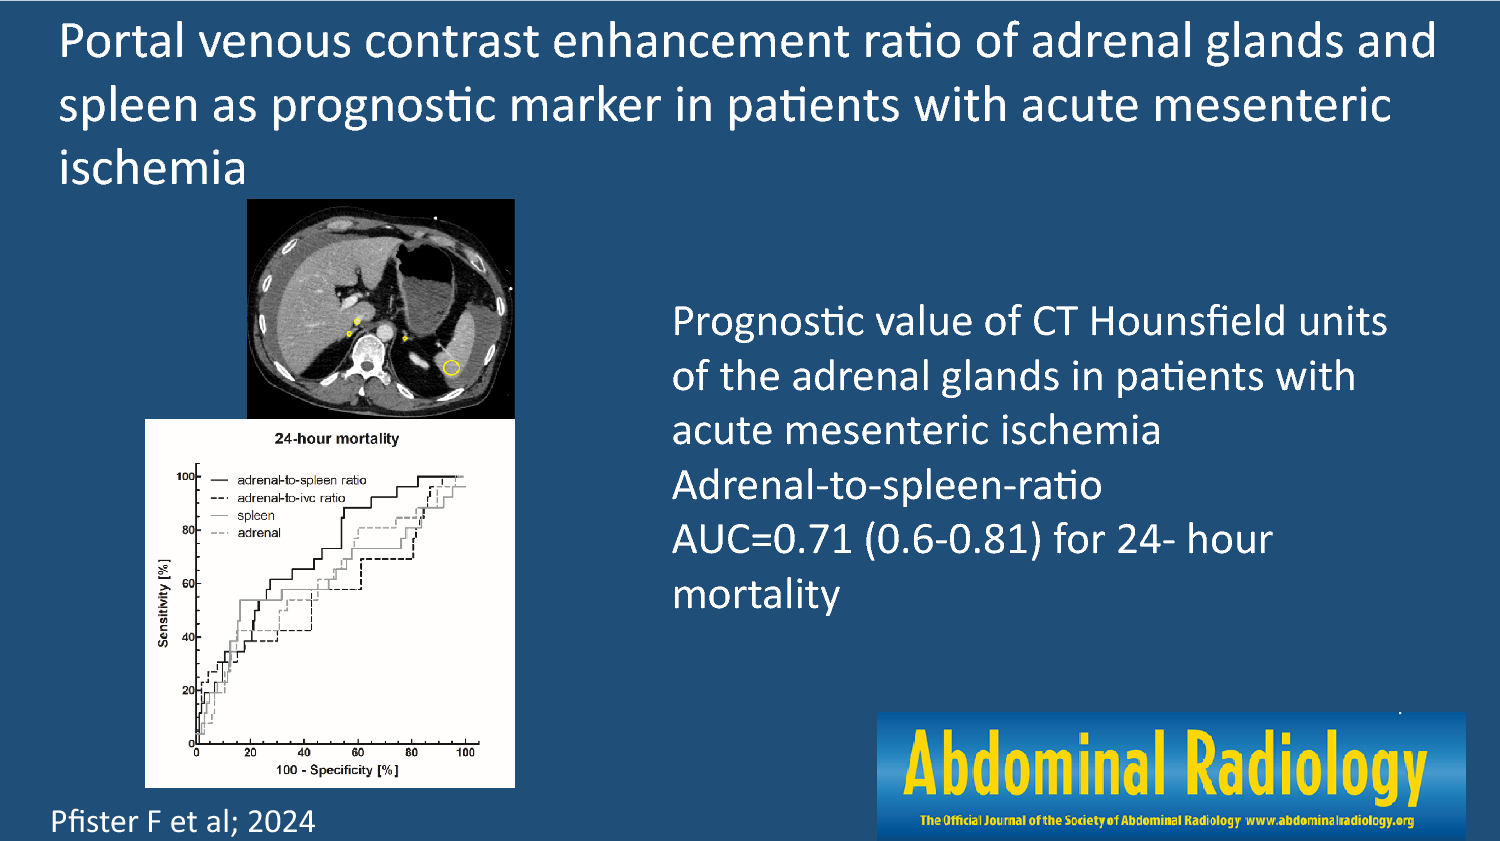 Portal venous contrast enhancement ratio of the adrenal glands and spleen as prognostic marker of mortality in patients with acute mesenteric ischemia